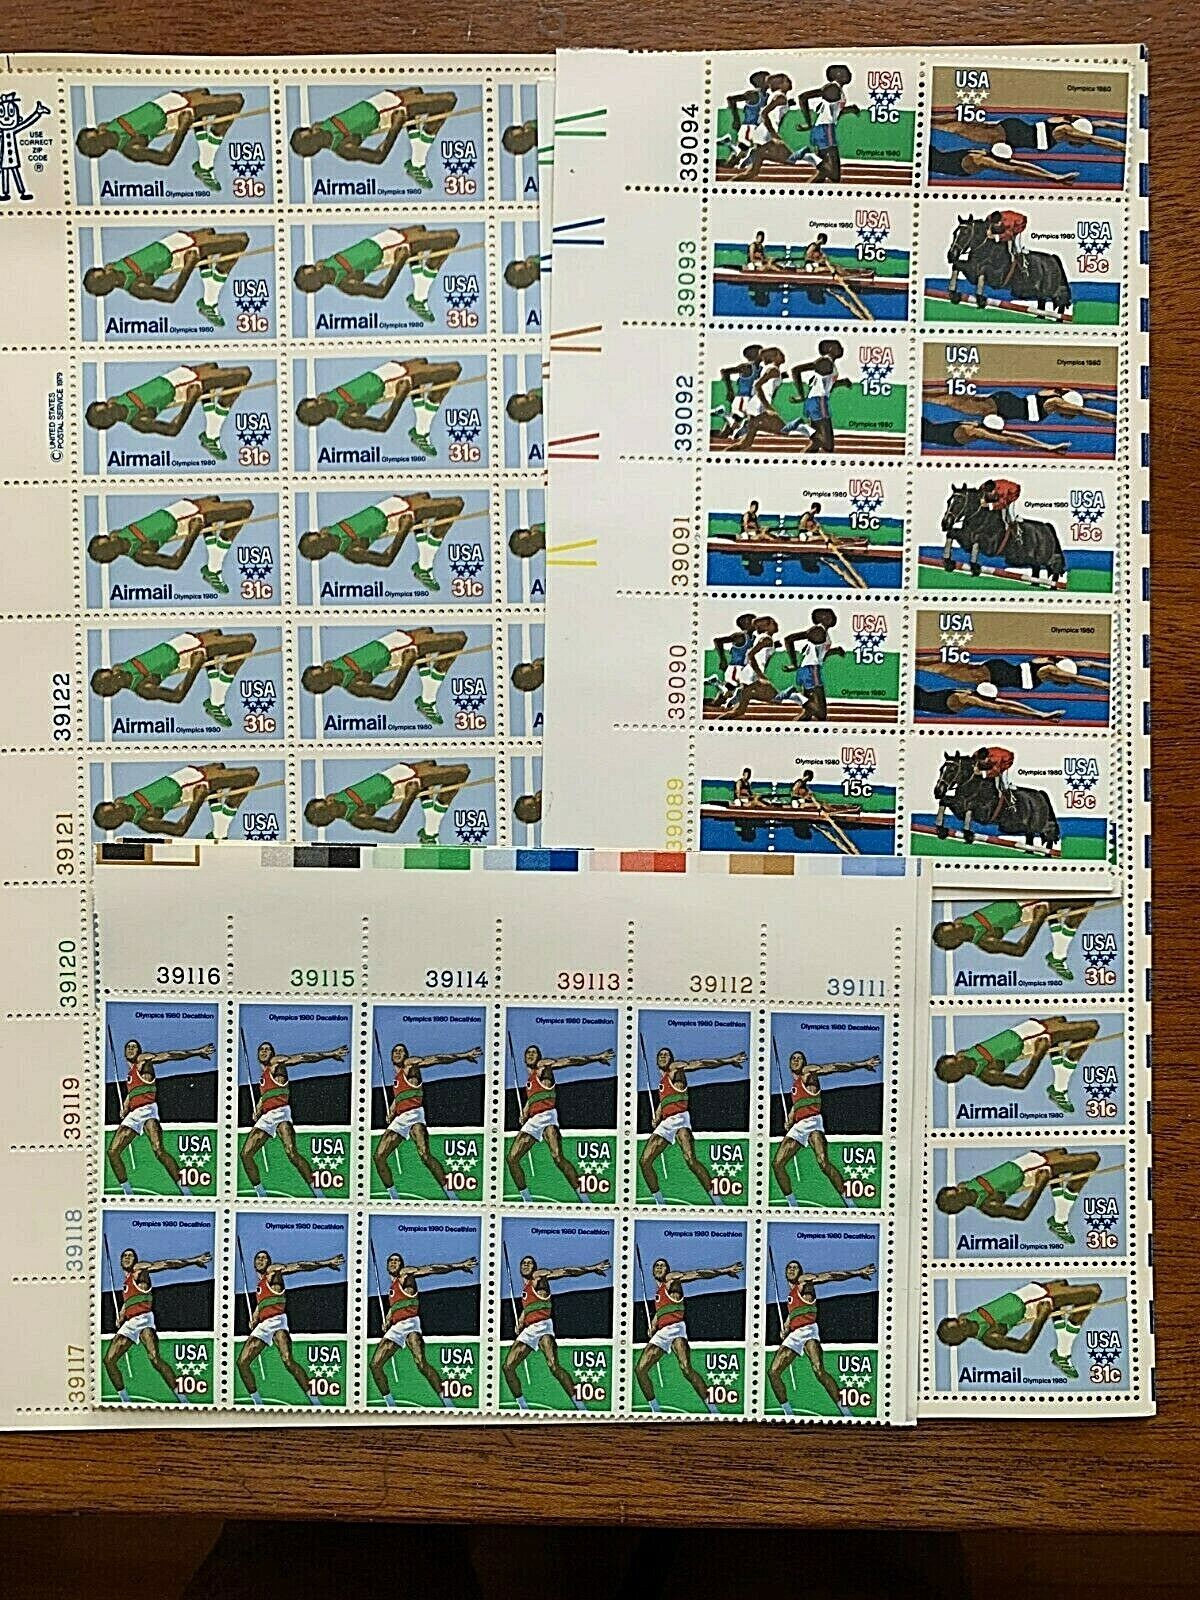 US postage-DISCOUNT. 1980 SUMMER OLYMPICS stamps. Sheets/blocks. FV: $55.50. Без бренда